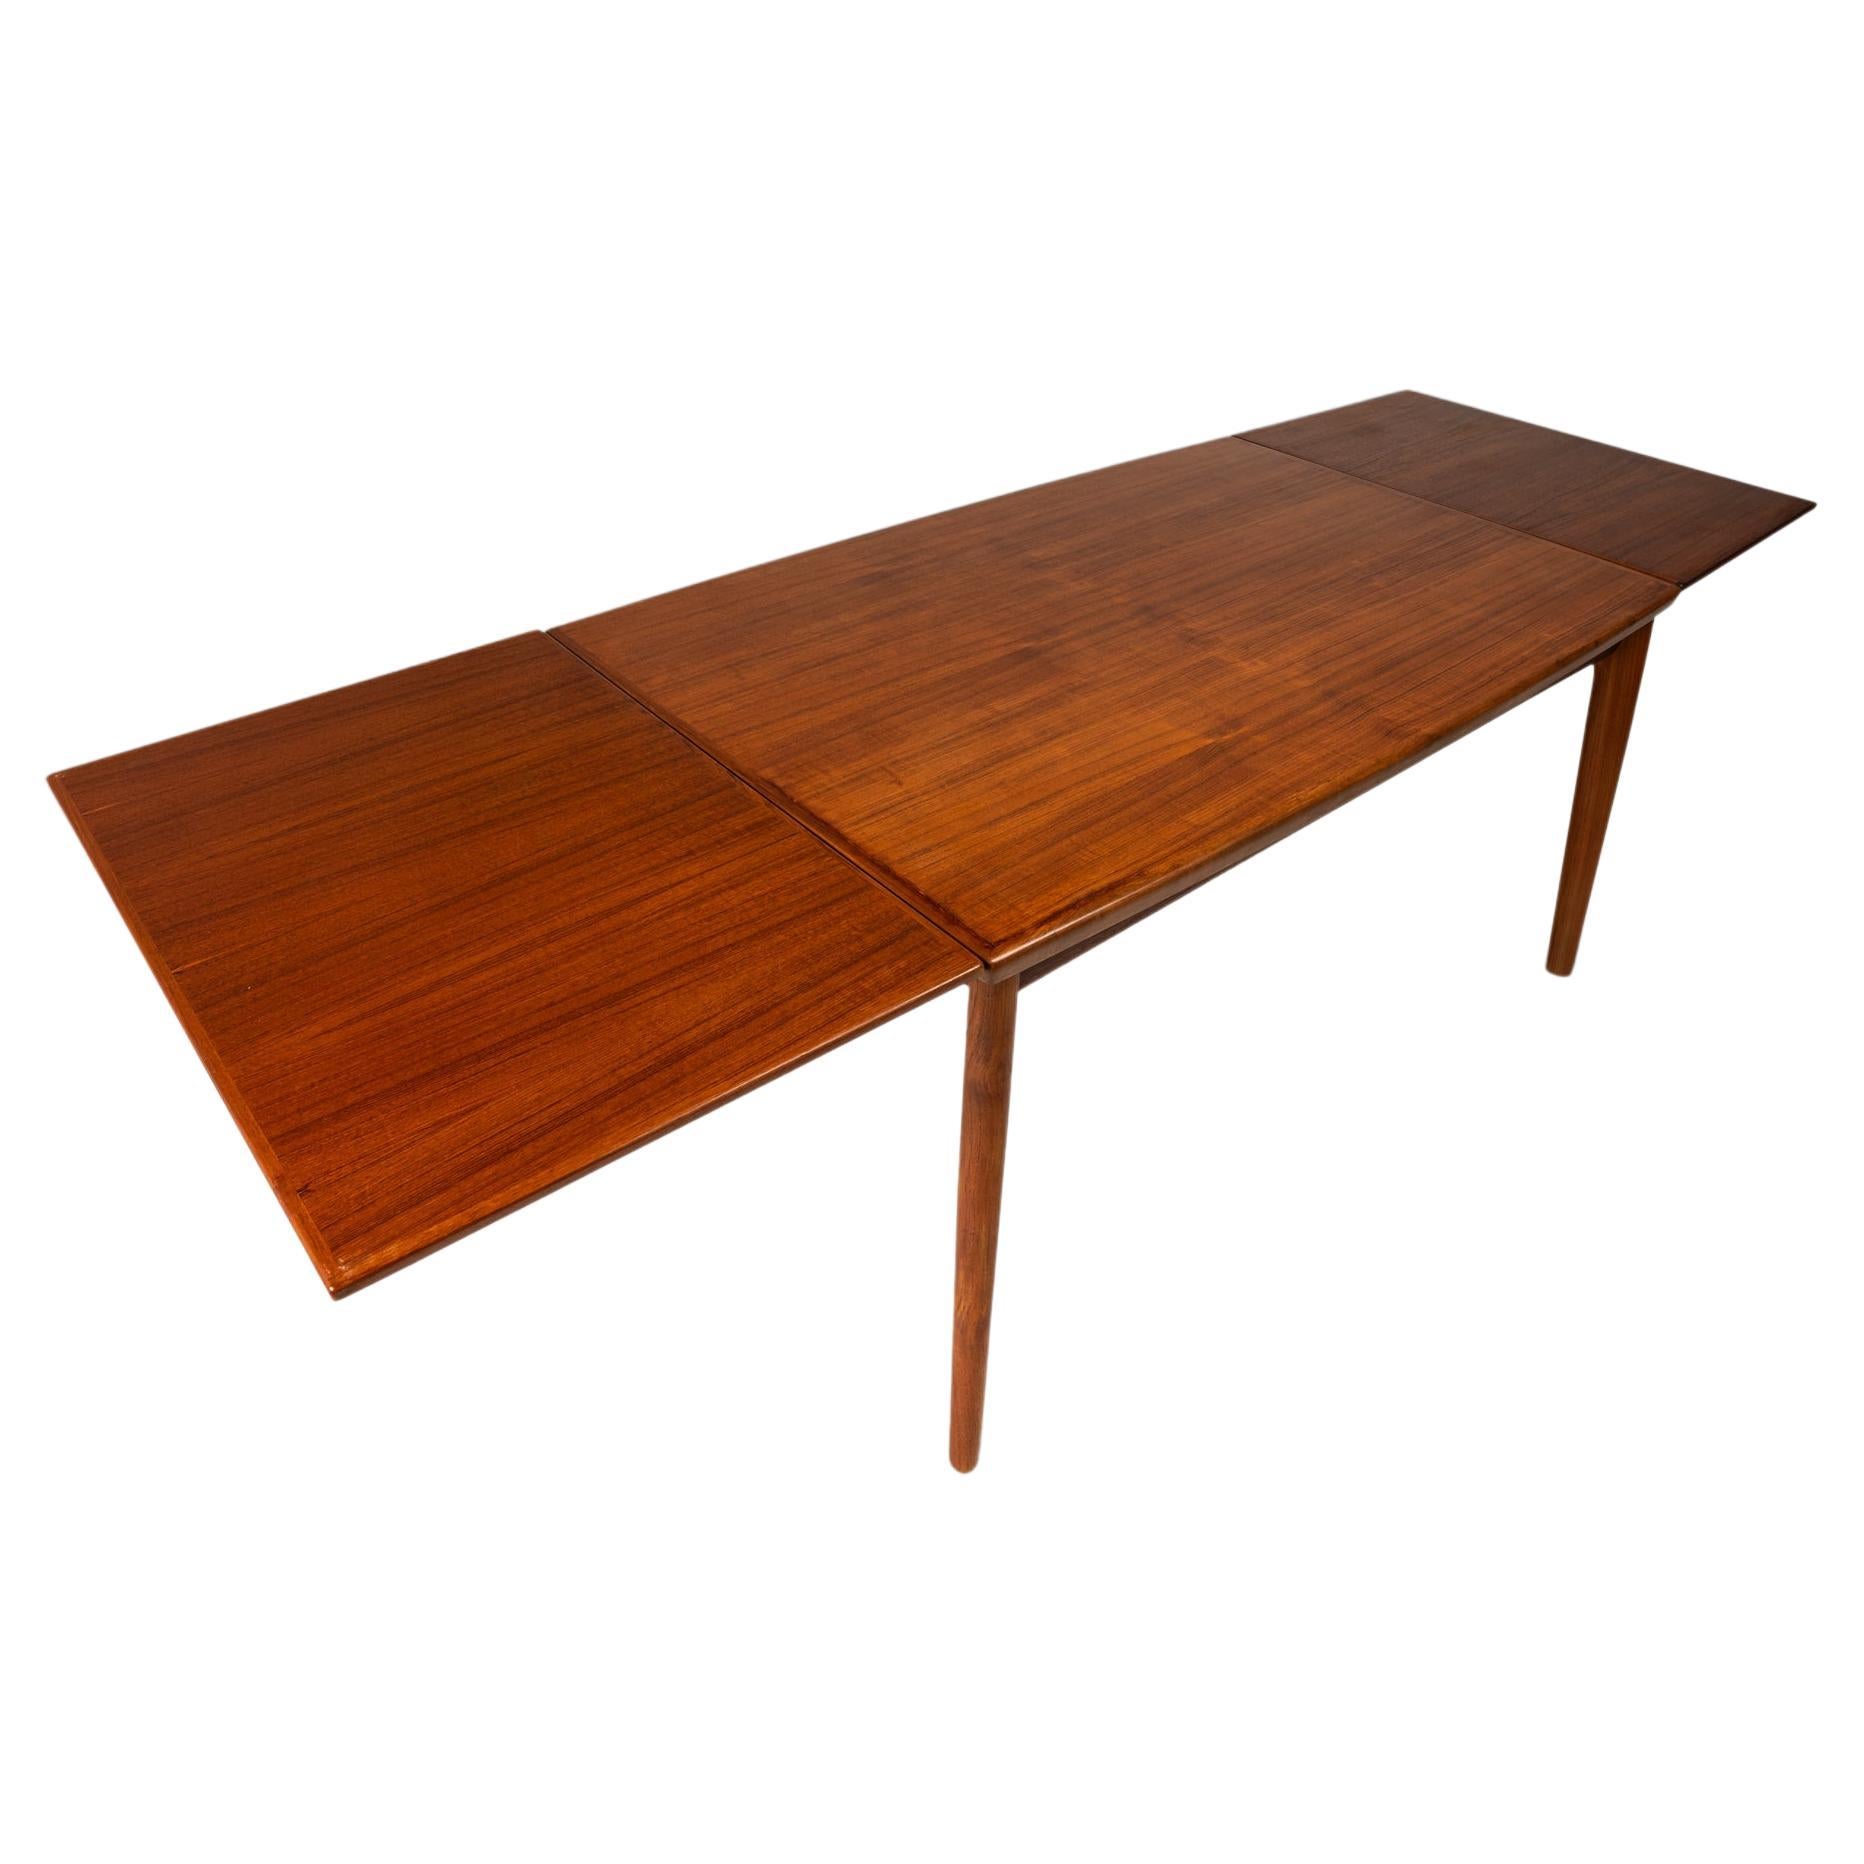 Danish Modern Expansion Dining Table in Teak w/ Stow-in-Table Leaves, c. 1960s For Sale